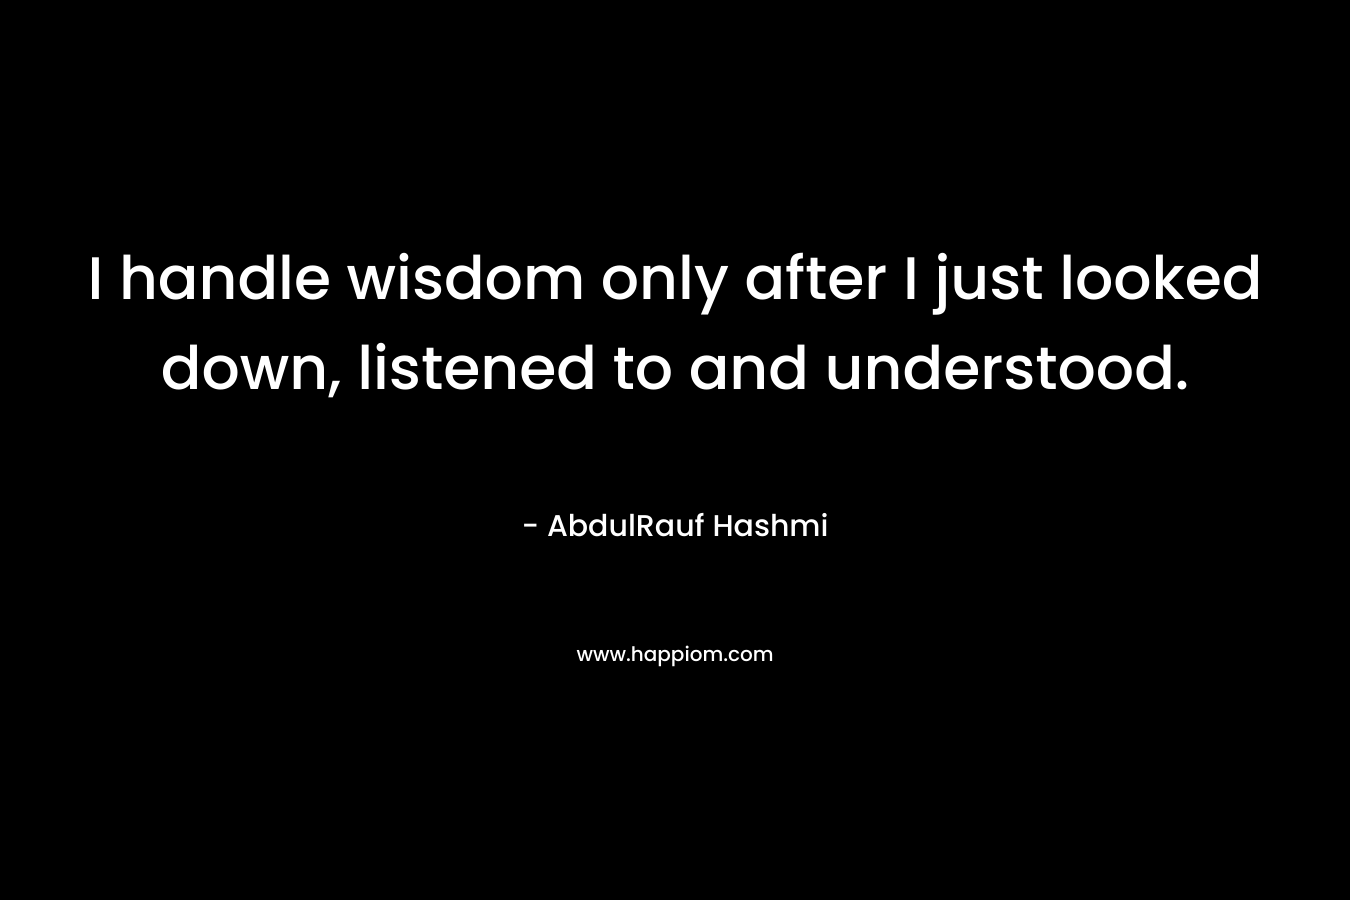 I handle wisdom only after I just looked down, listened to and understood. – AbdulRauf Hashmi